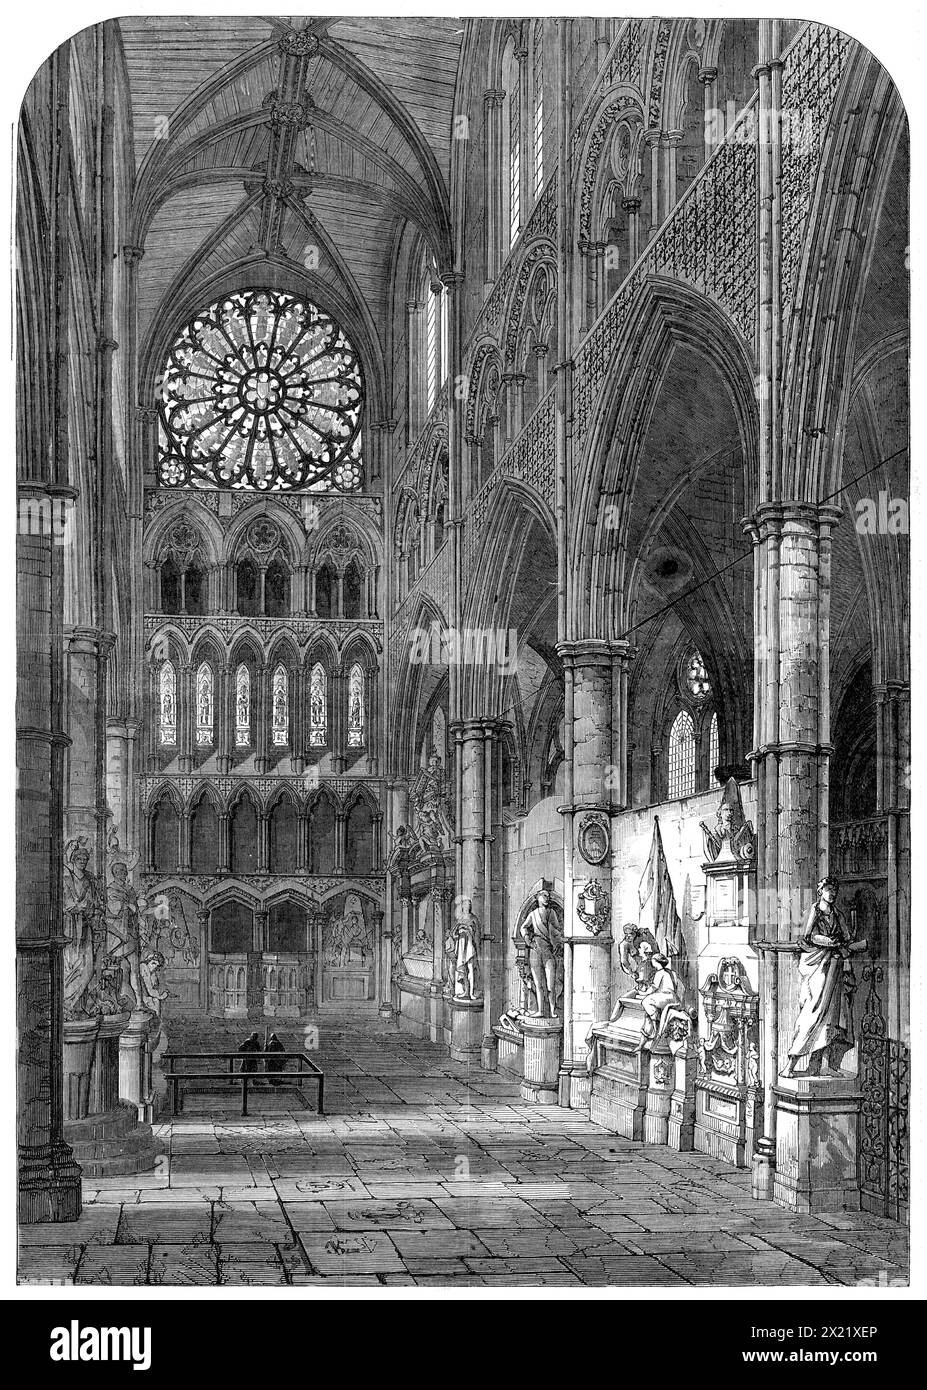 &quot;Statesmen's Corner&quot;, North Transept, Westminster Abbey, [London], 1865. 'The more ancient monuments of the larger size, conspicuous on the opposite side of the north transept are those of two Dukes of Newcastle. These are, first, William Cavendish, the loyalist Duke, who died in 1676, and who lies here with his wife, the Duchess Margaret...The second is John Holles, the Duke who died in 1711. Three of our old Admirals - namely, Sir Charles Wagner, Vernon, of Portobello, and Sir Peter Warren - are likewise accommodated here...The statue of Canning, by Sir Francis Chantrey, is nearly Stock Photo